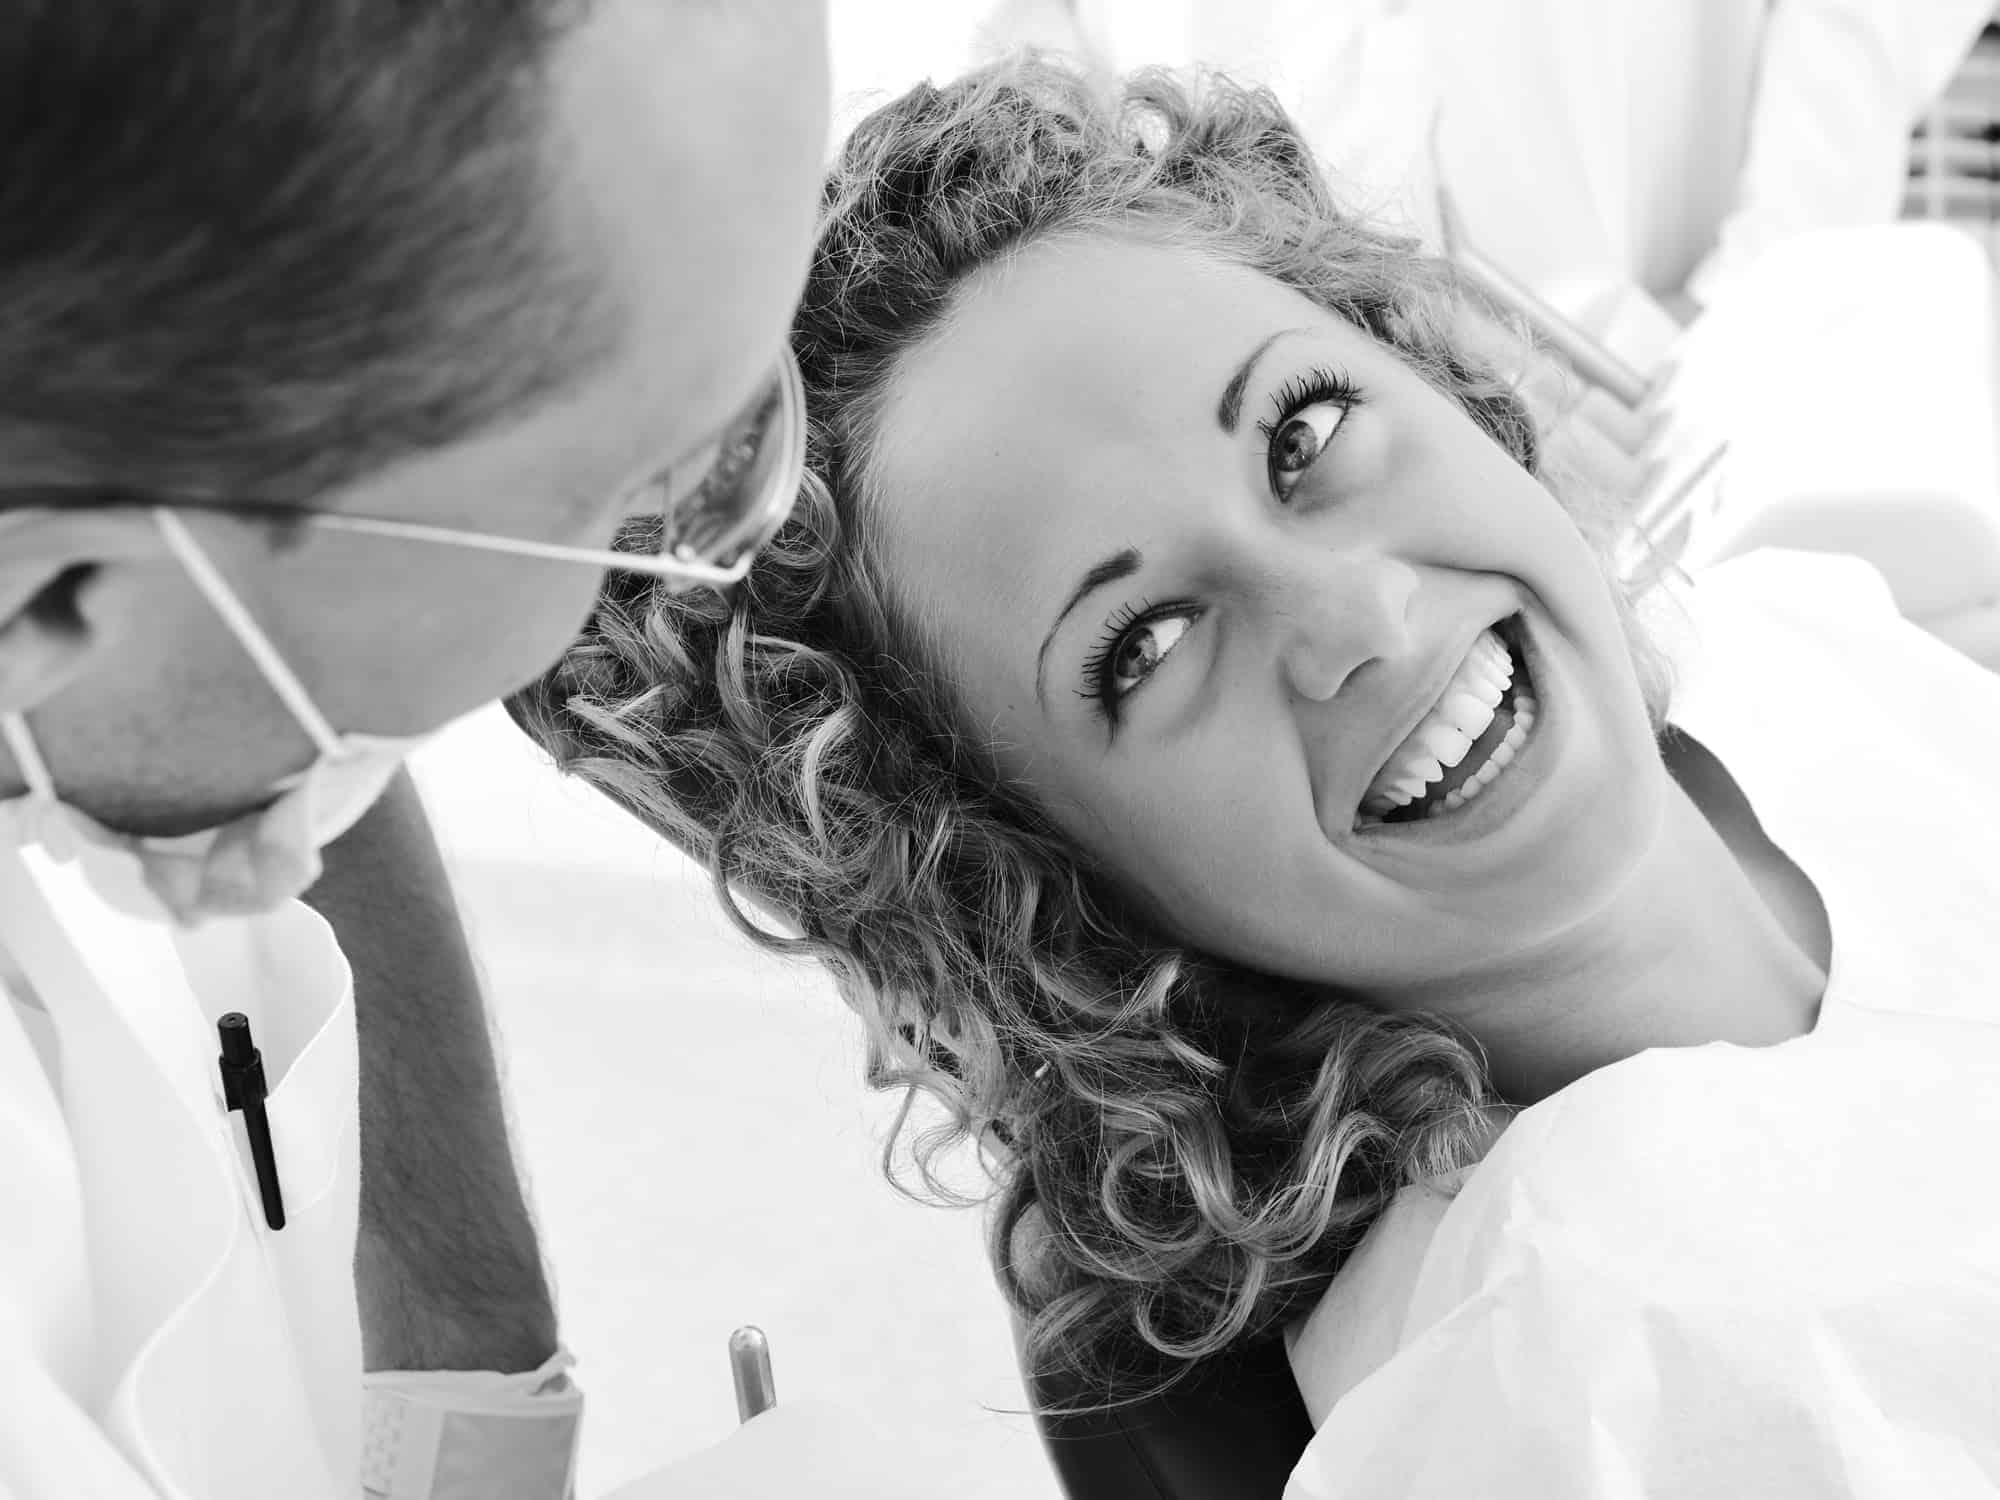 The #1 Way to Get More Dental Patient Referrals